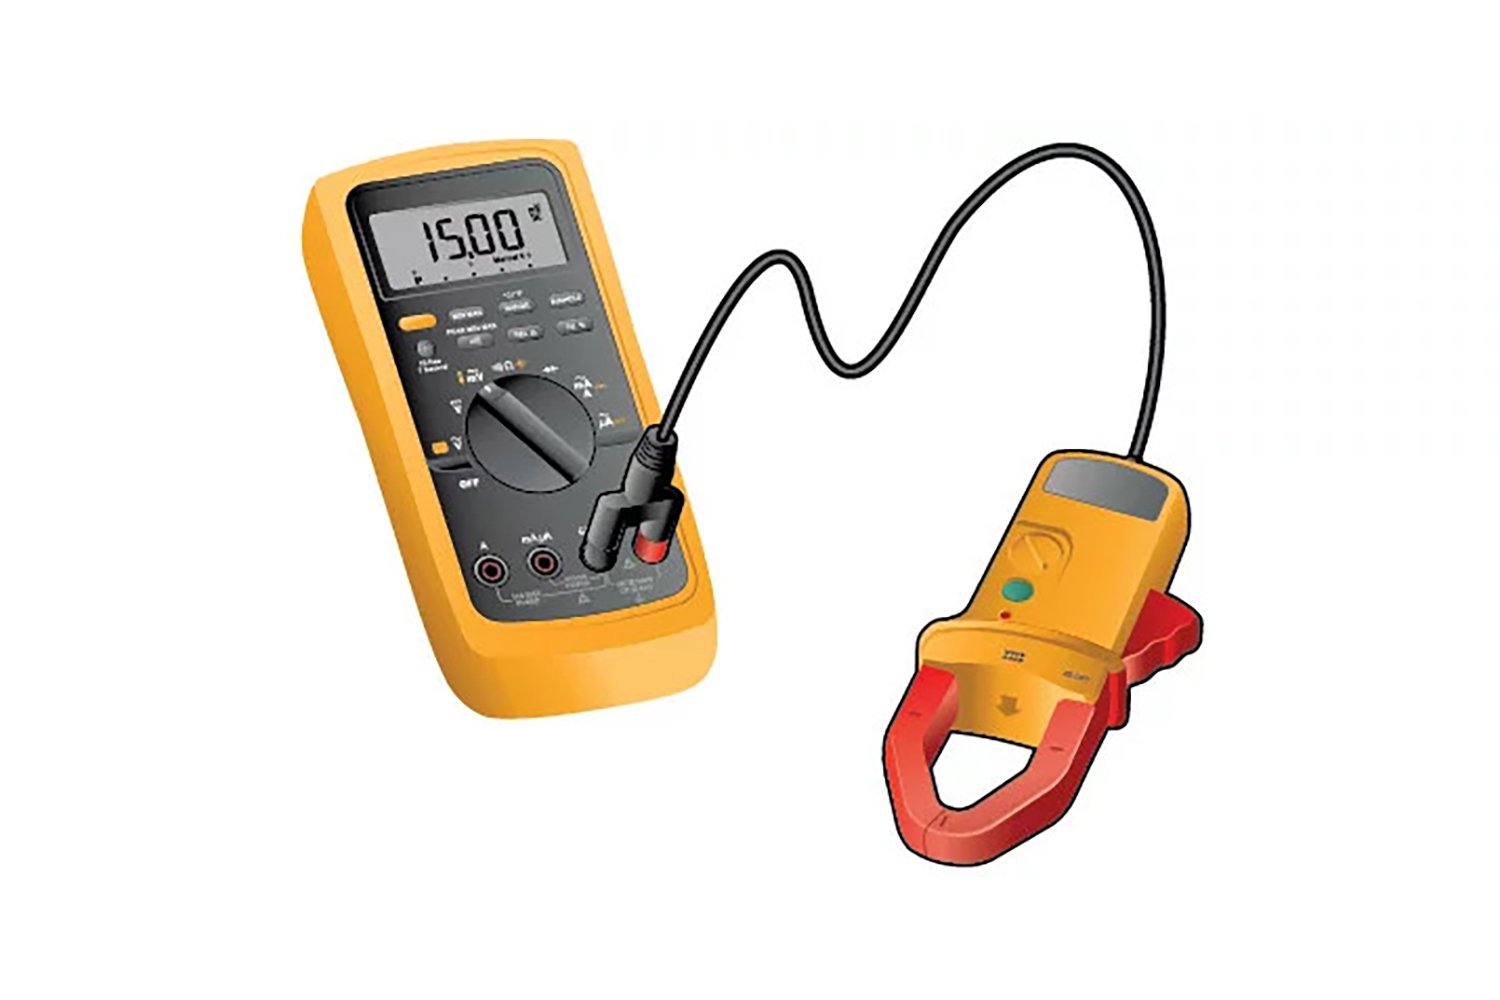 How To Check Amps In Multimeter How to Measure Current with a Clamp Accessory | Fluke